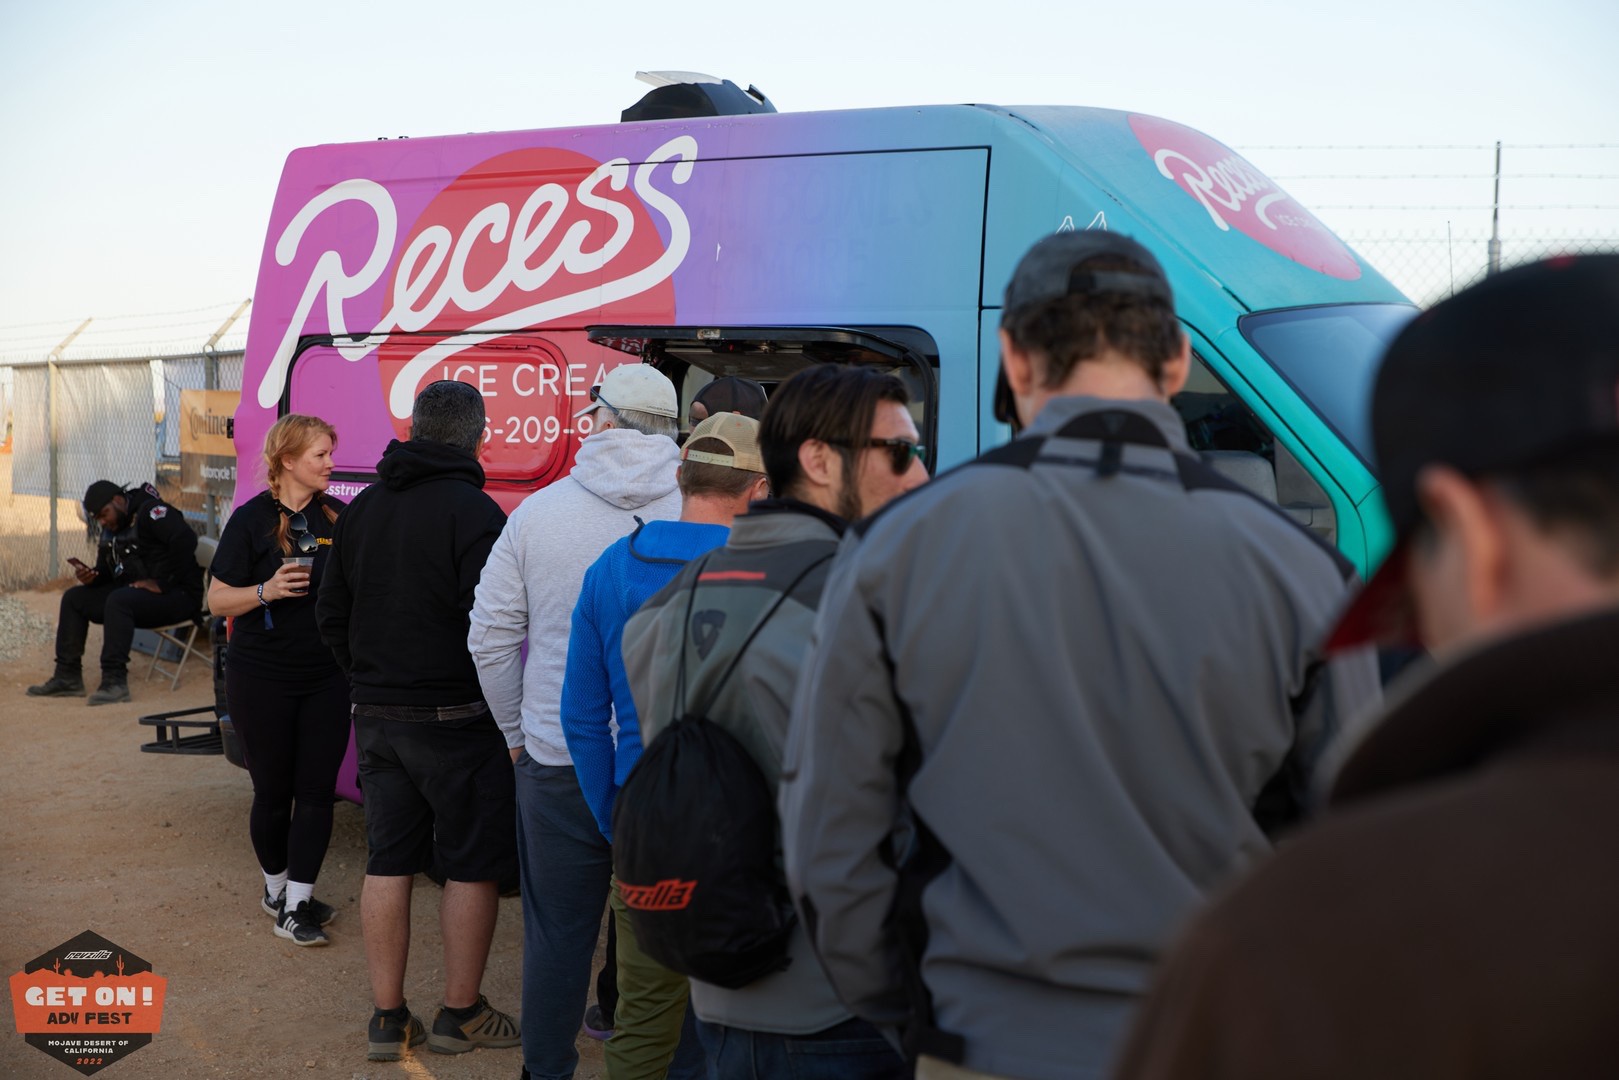 People lined up outside ice cream truck during GET ON! Adv Fest 2022